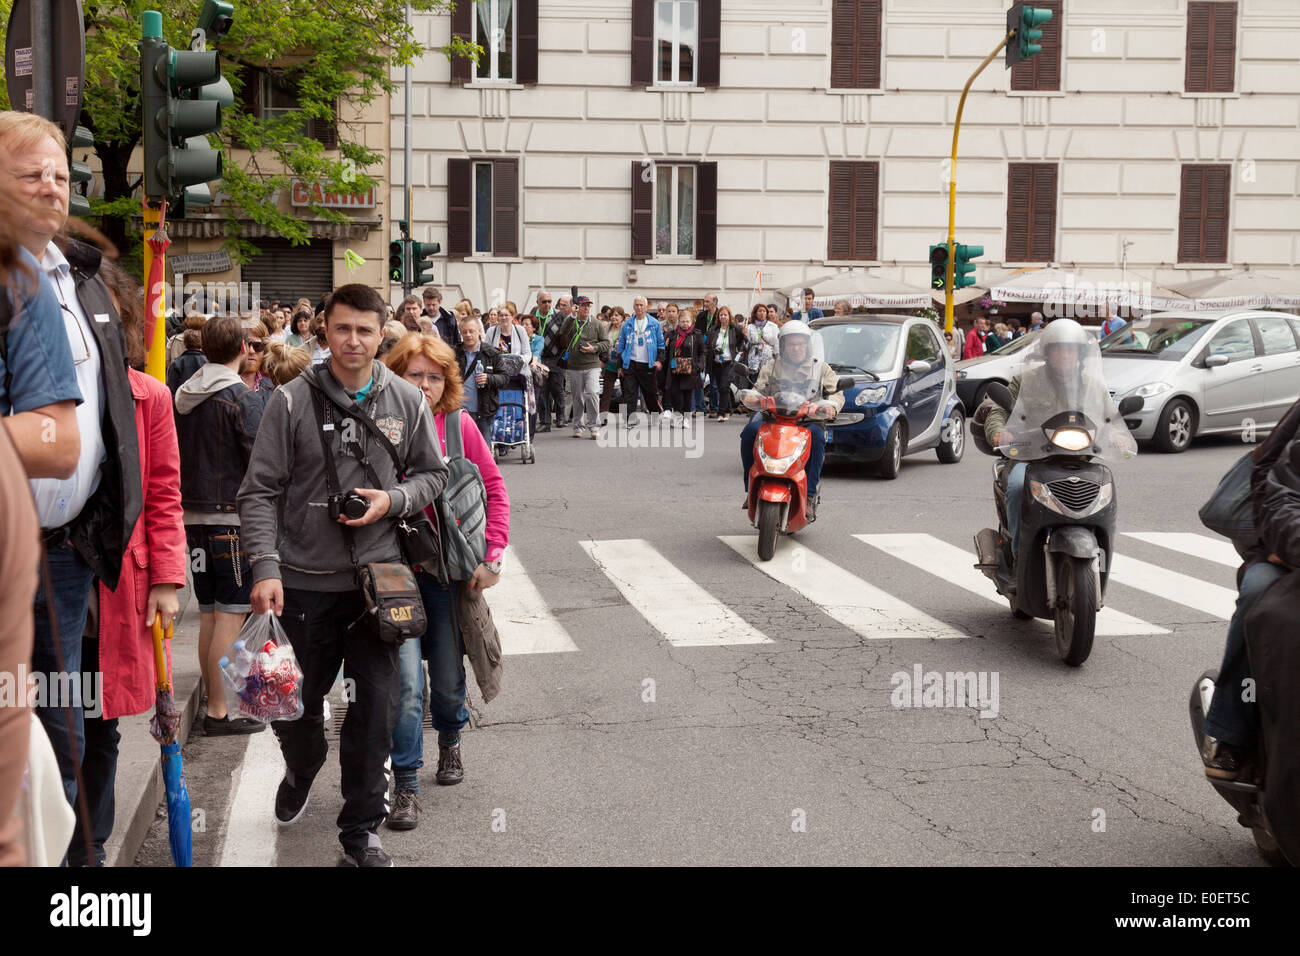 Crowds on the streets and traffic, Rome, Italy Europe Stock Photo